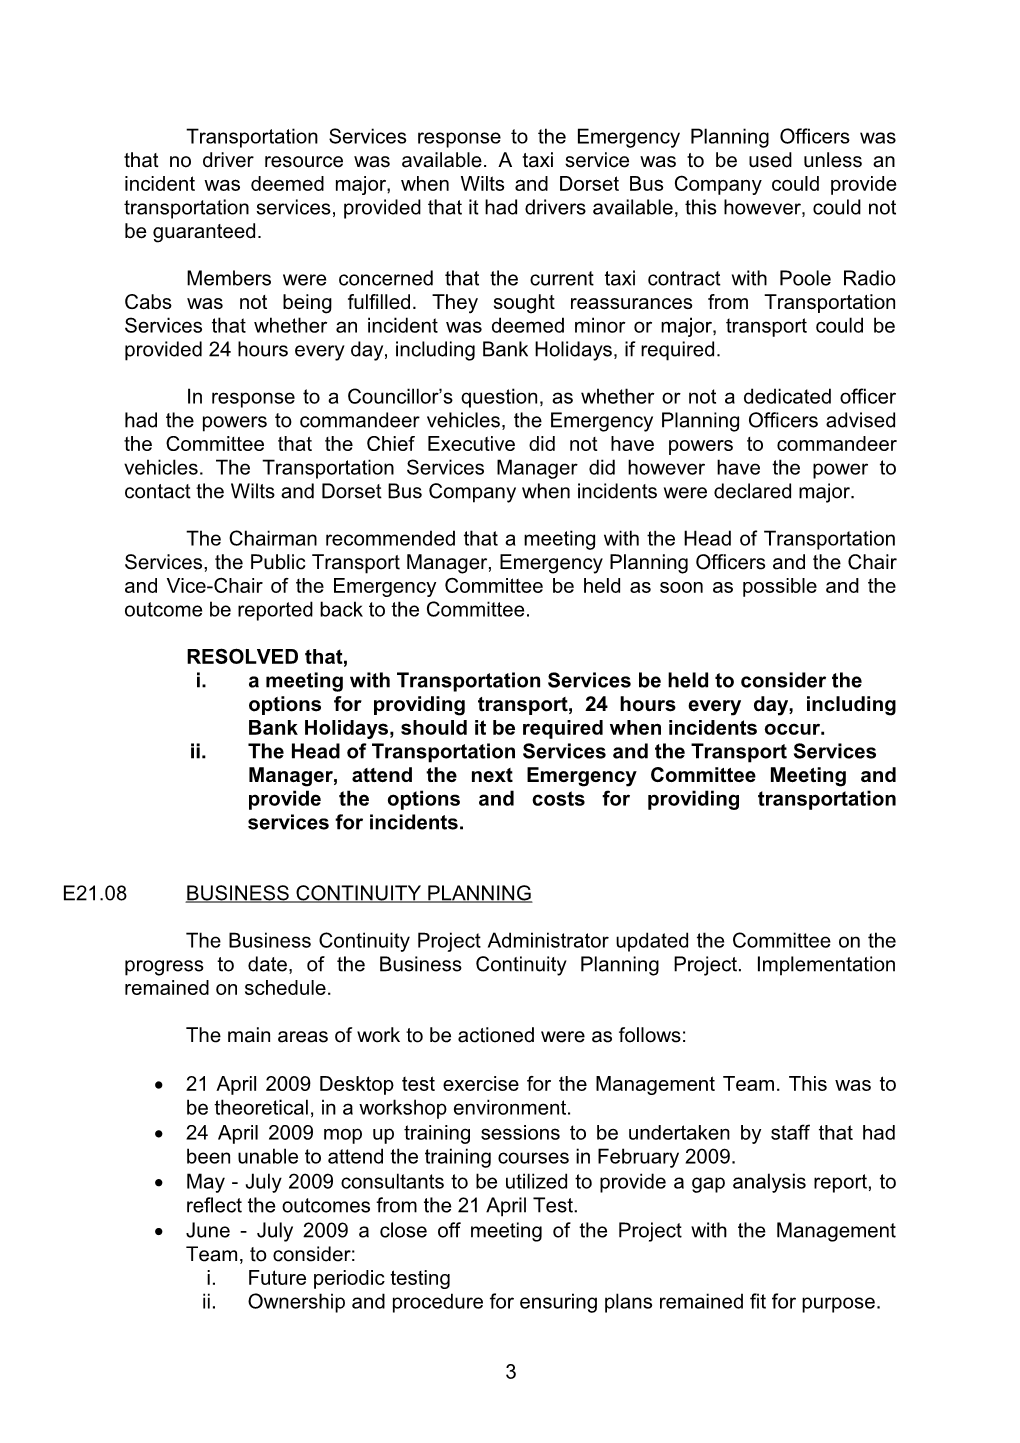 Minutes - Emergency Committee - 27 April 2009